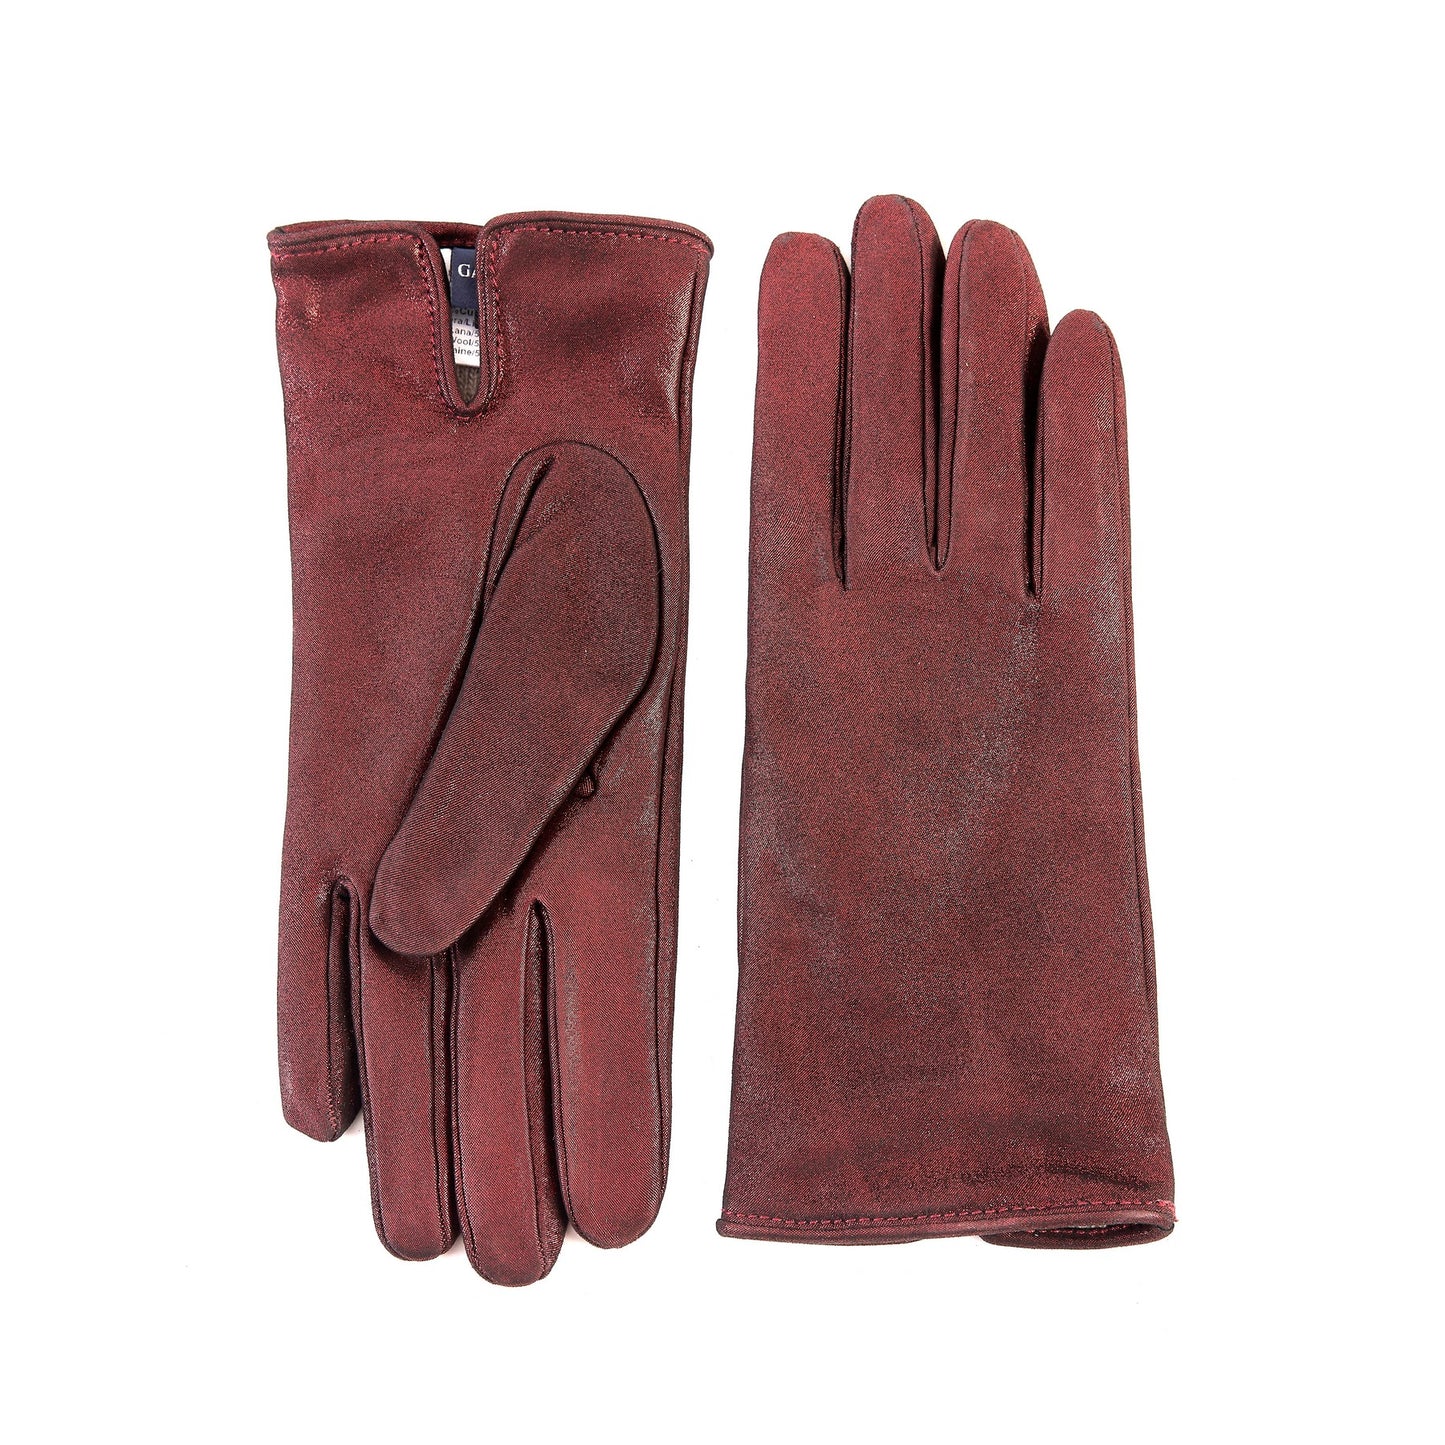 Women’s basic red soft laminated suede leather gloves with palm opening and mix cashmere lining